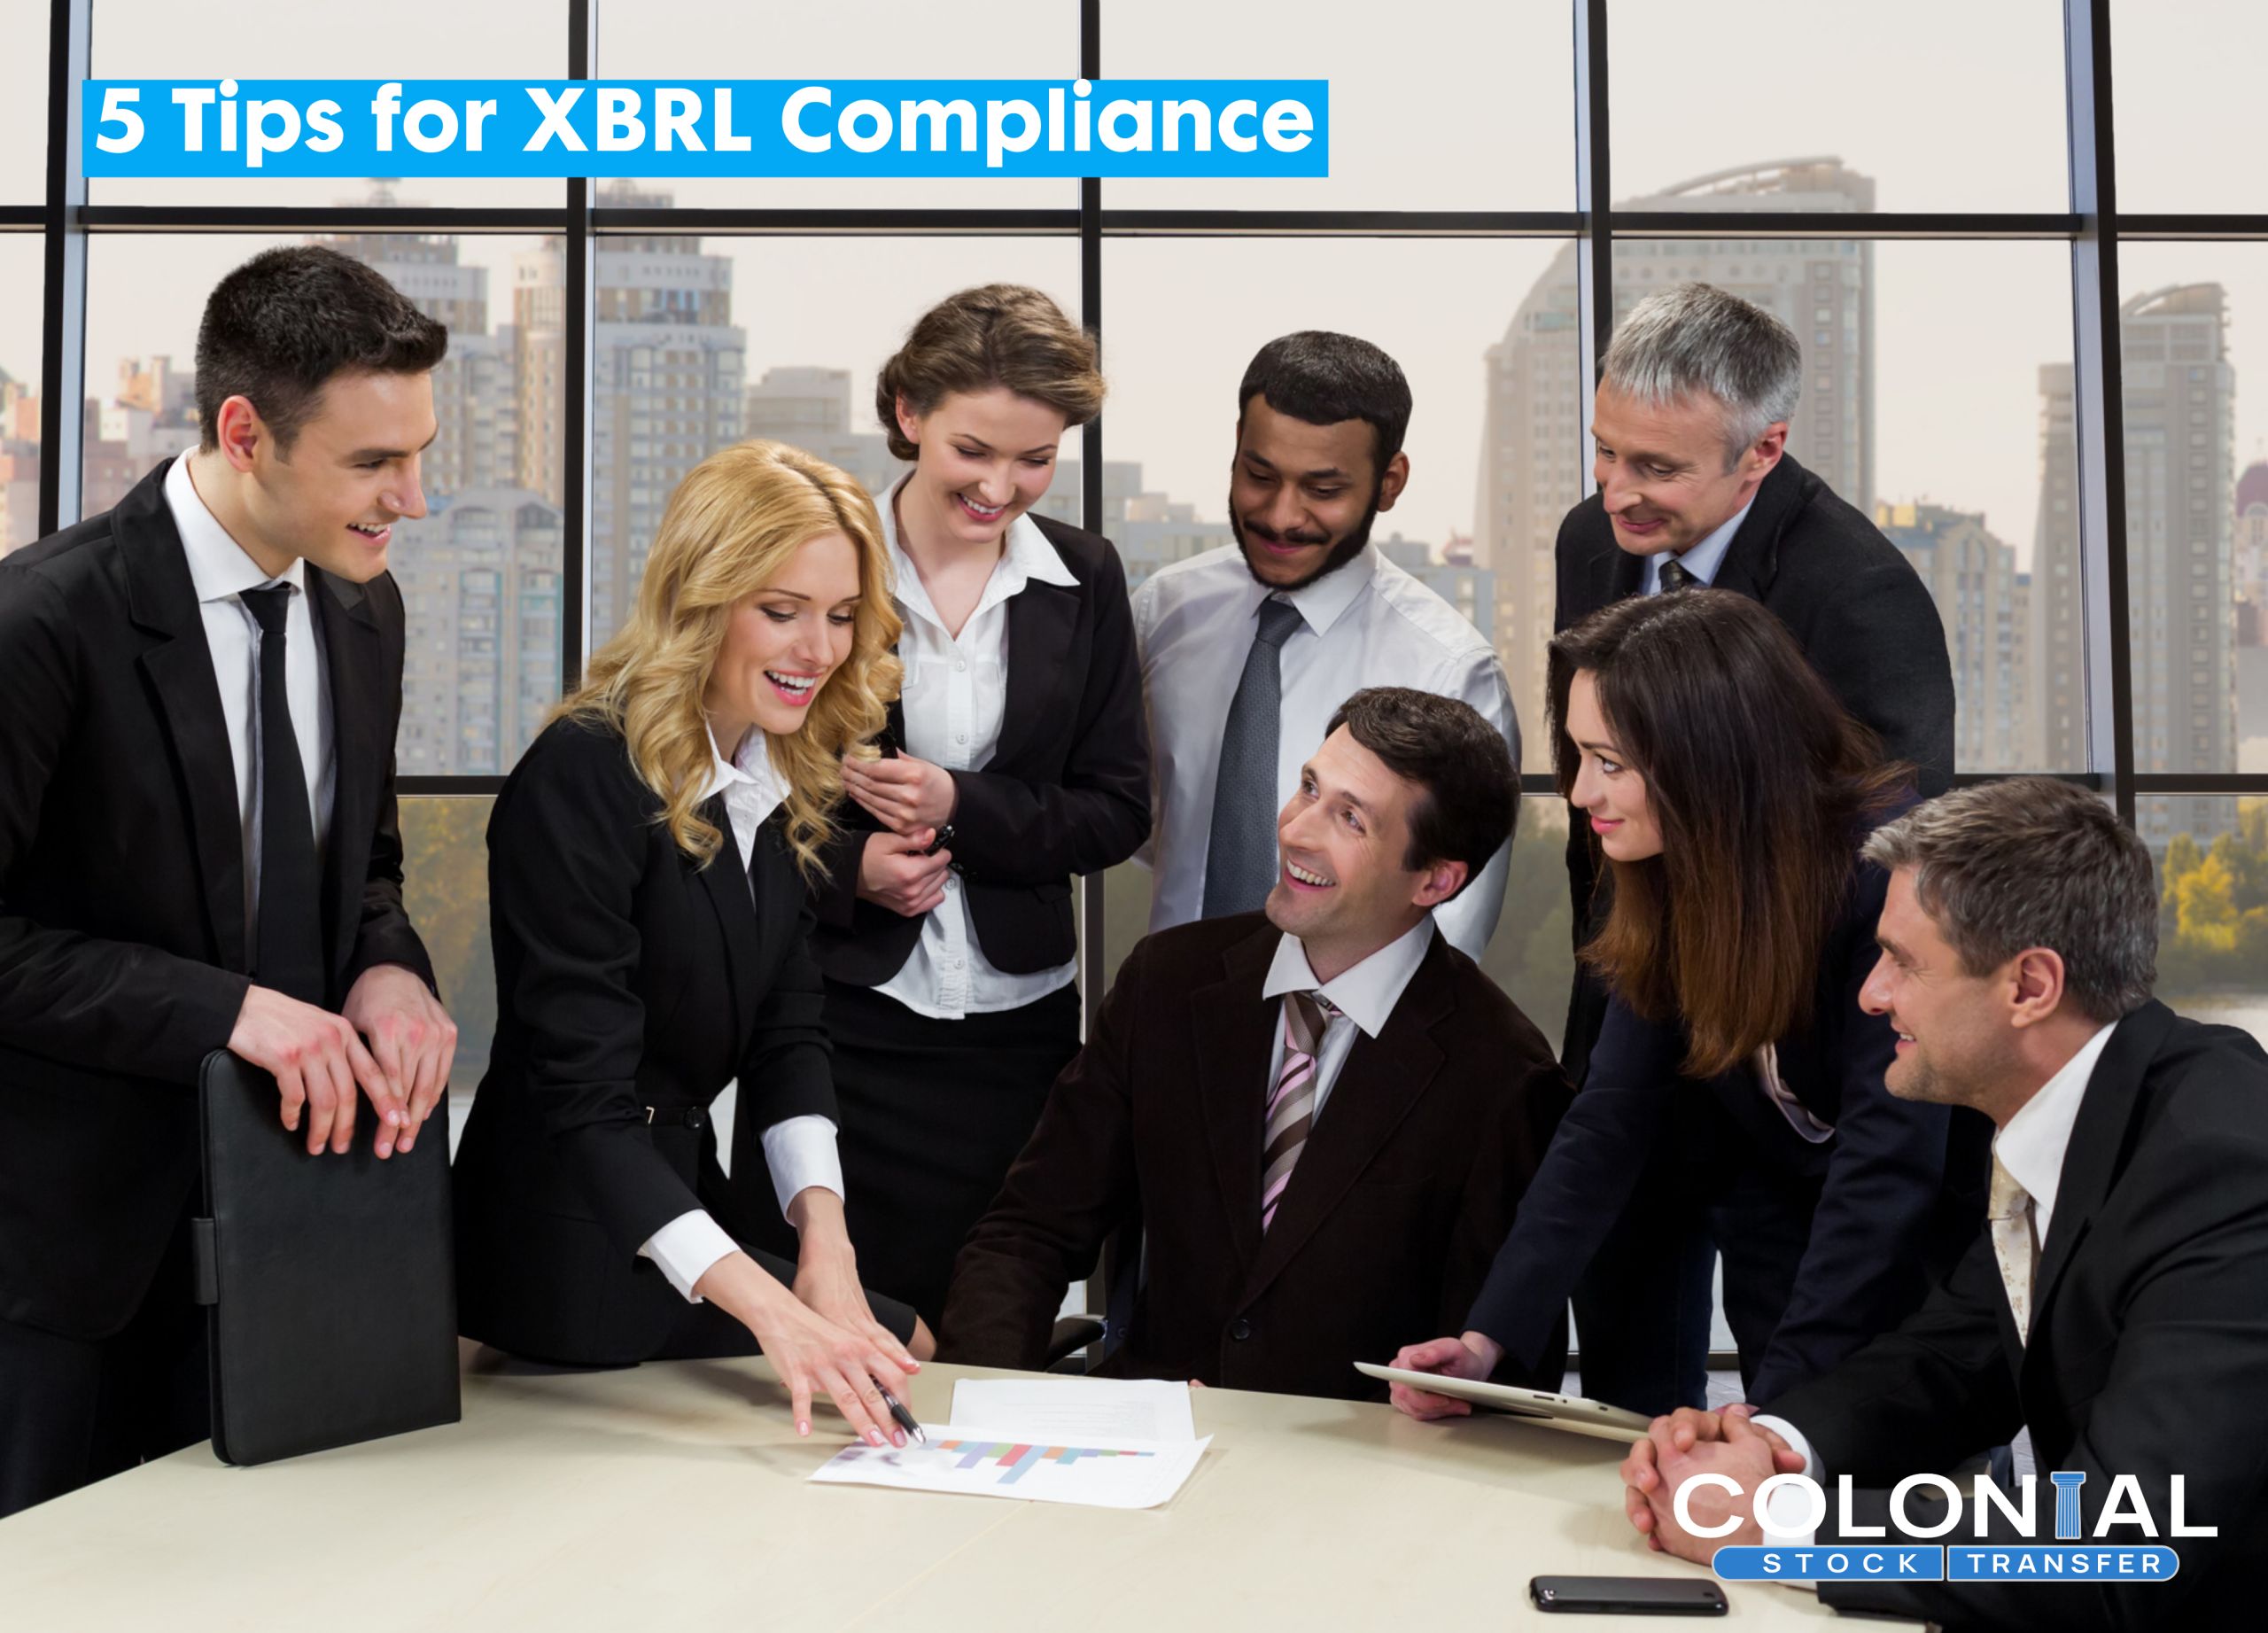 5 Tips for XBRL Compliance